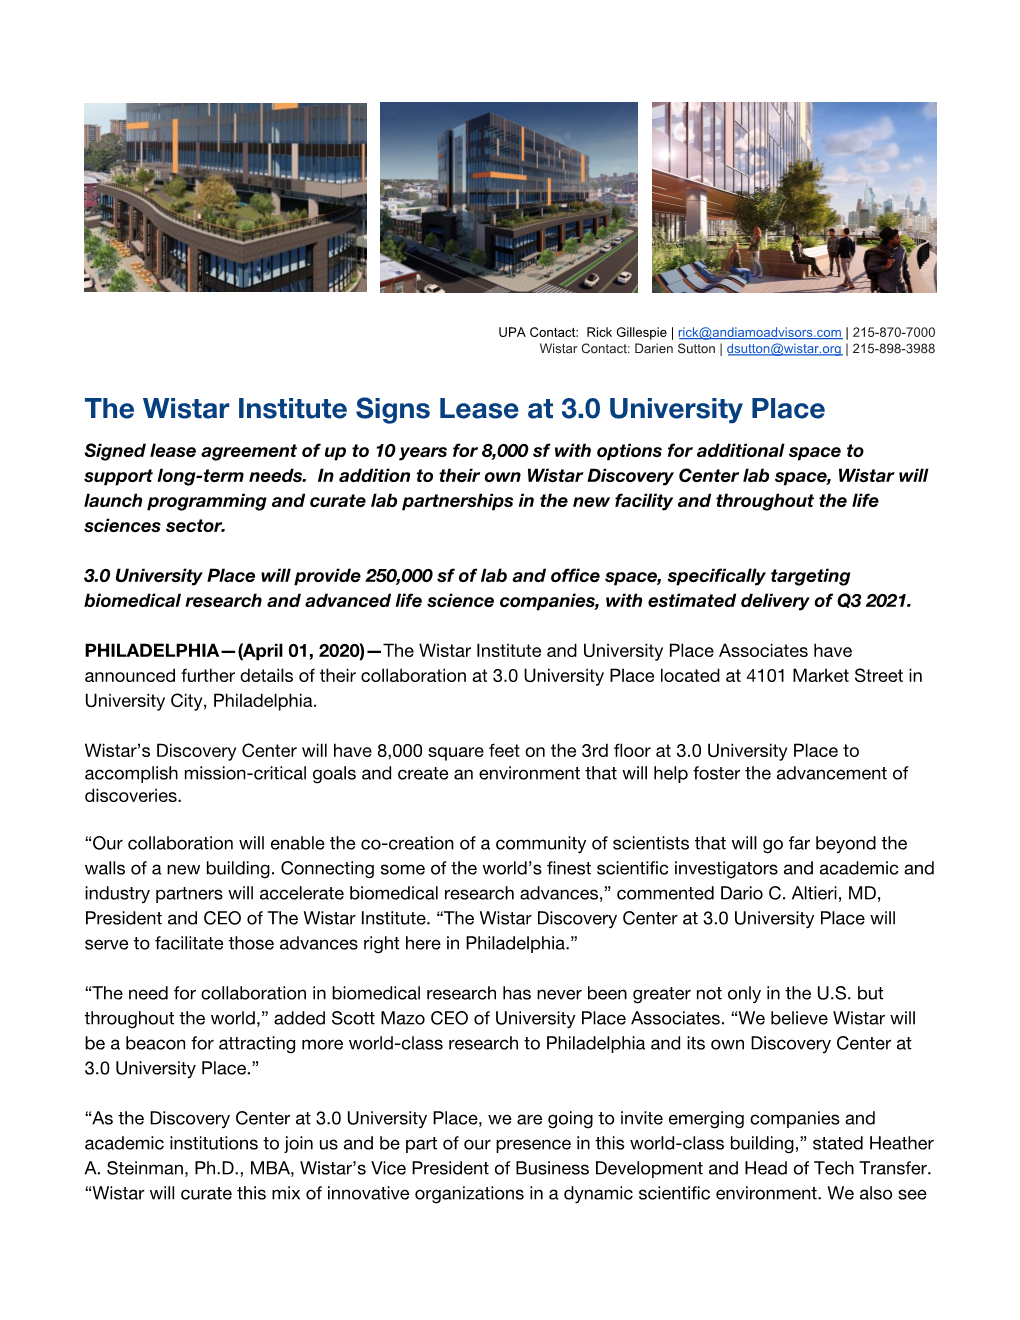 The Wistar Institute Signs Lease at 3.0 University Place